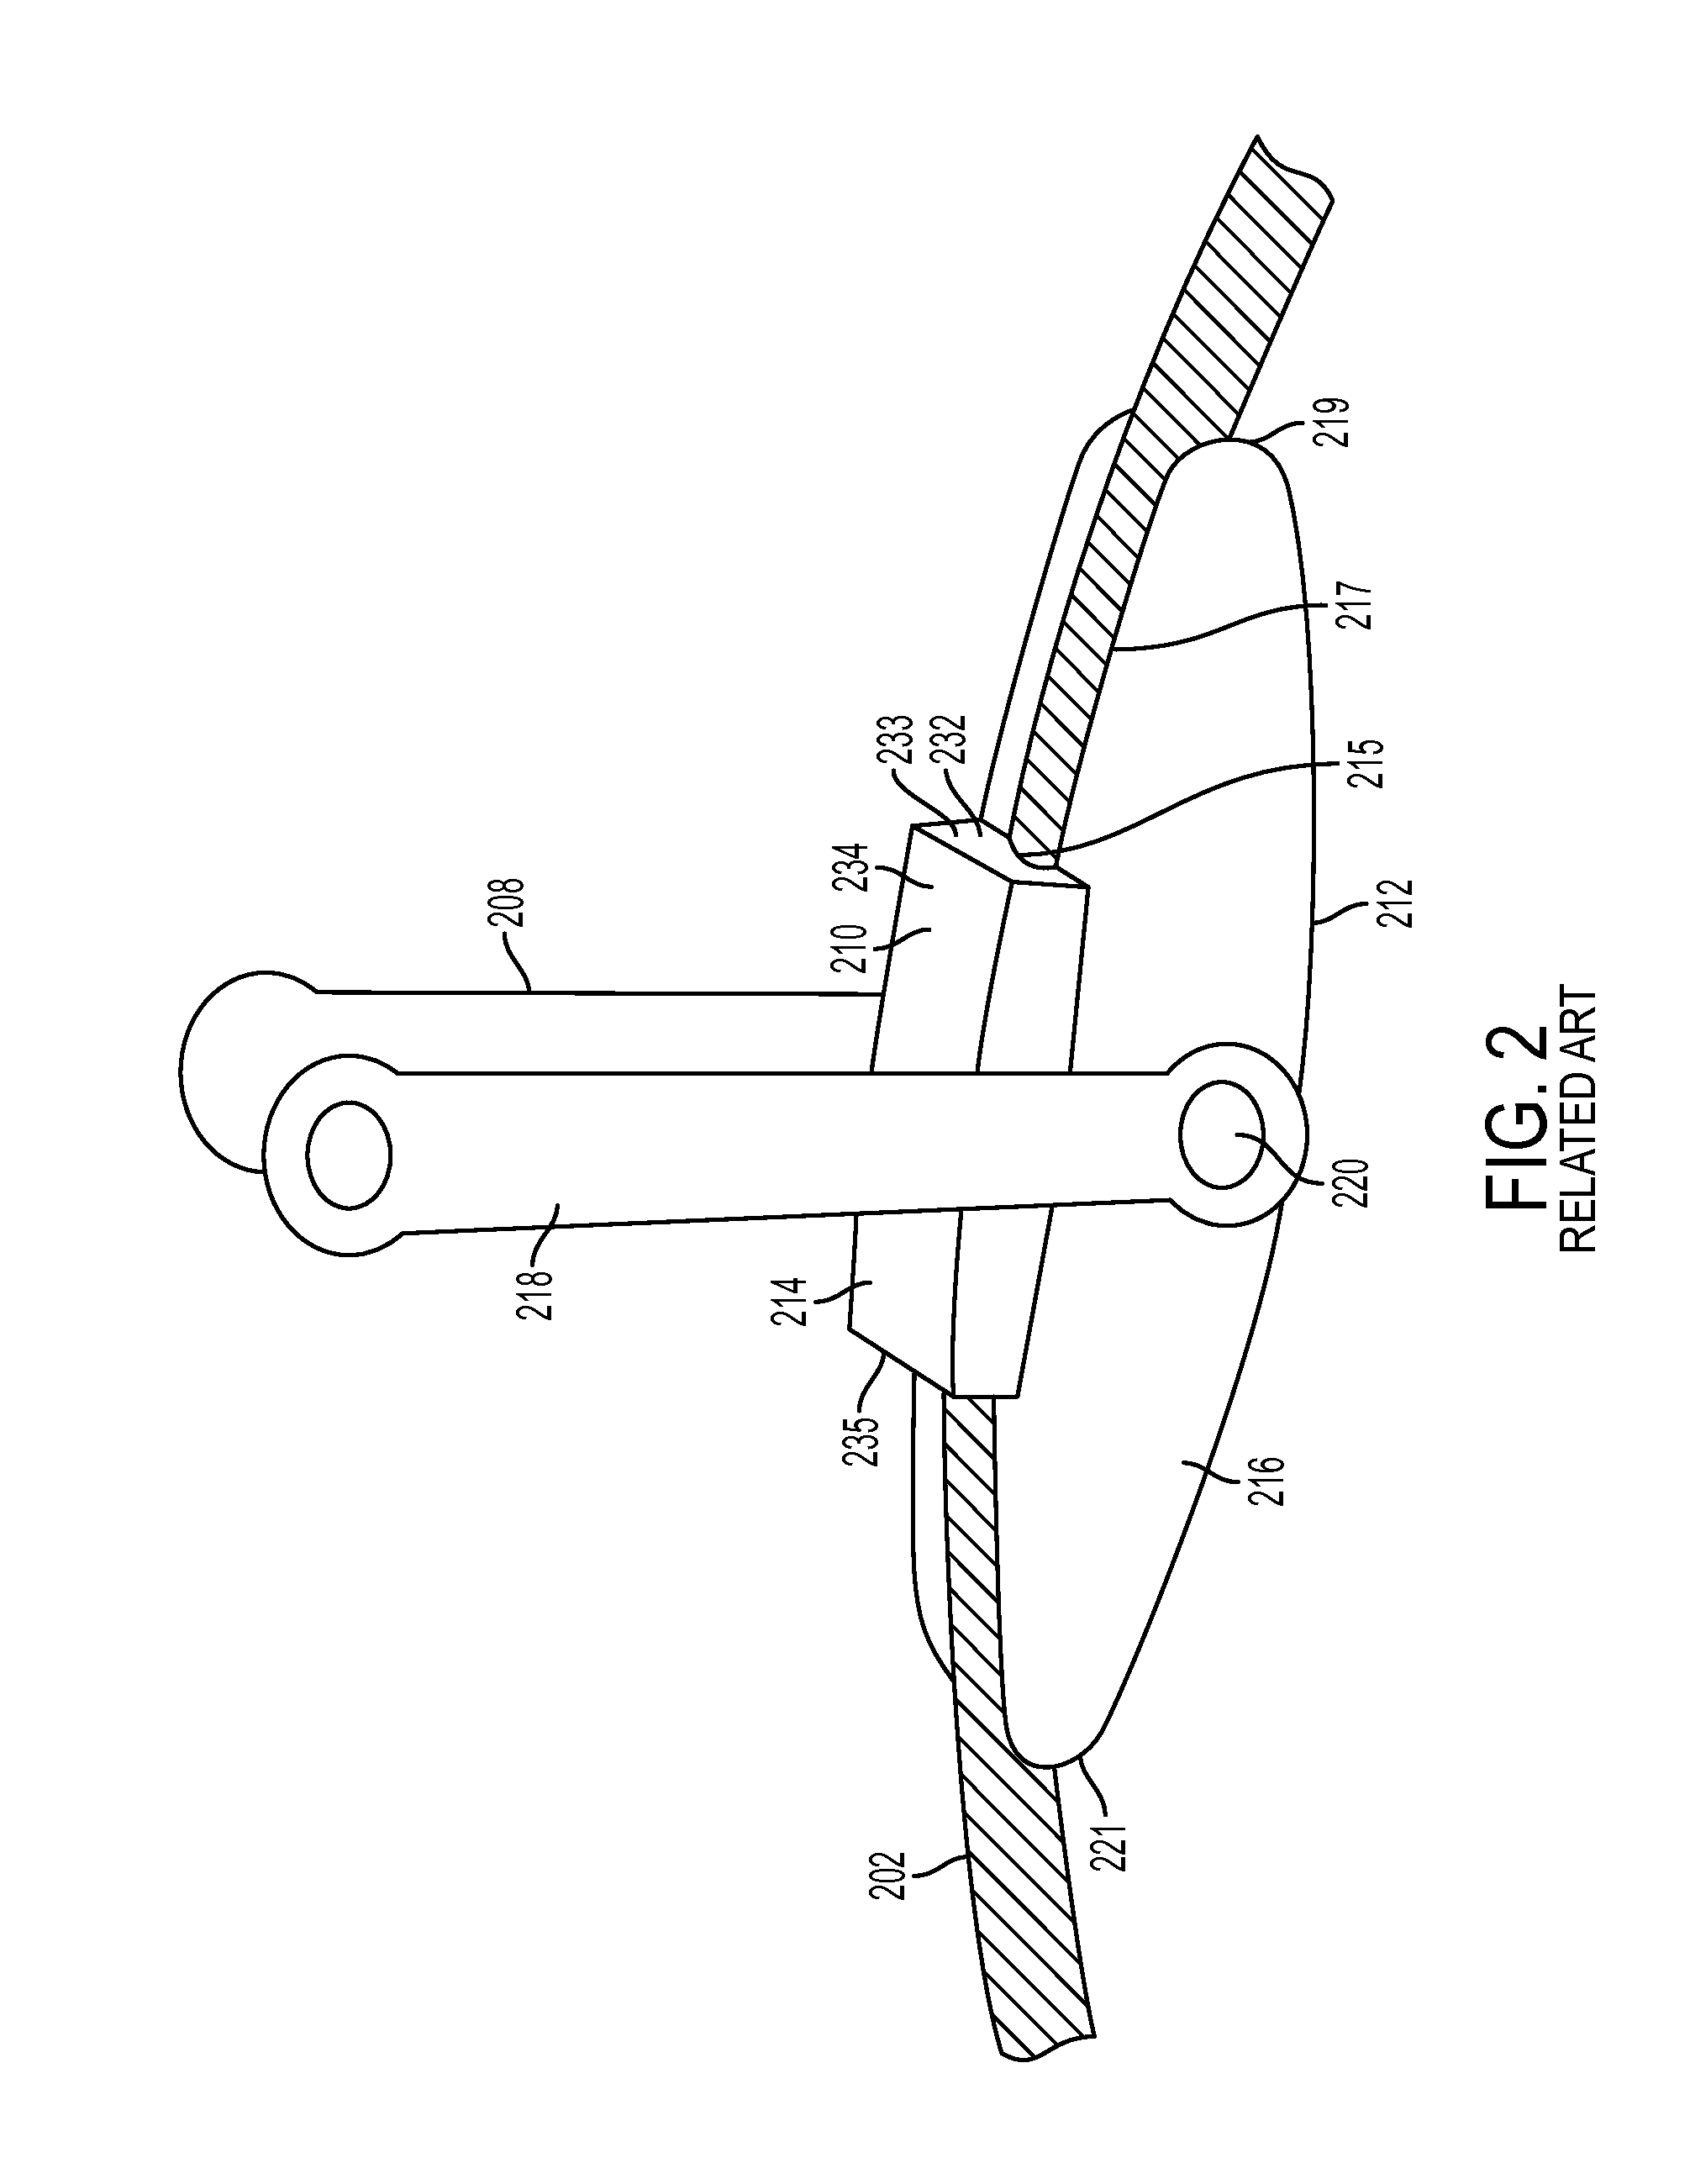 Apparatuses, systems and methods for detecting corona